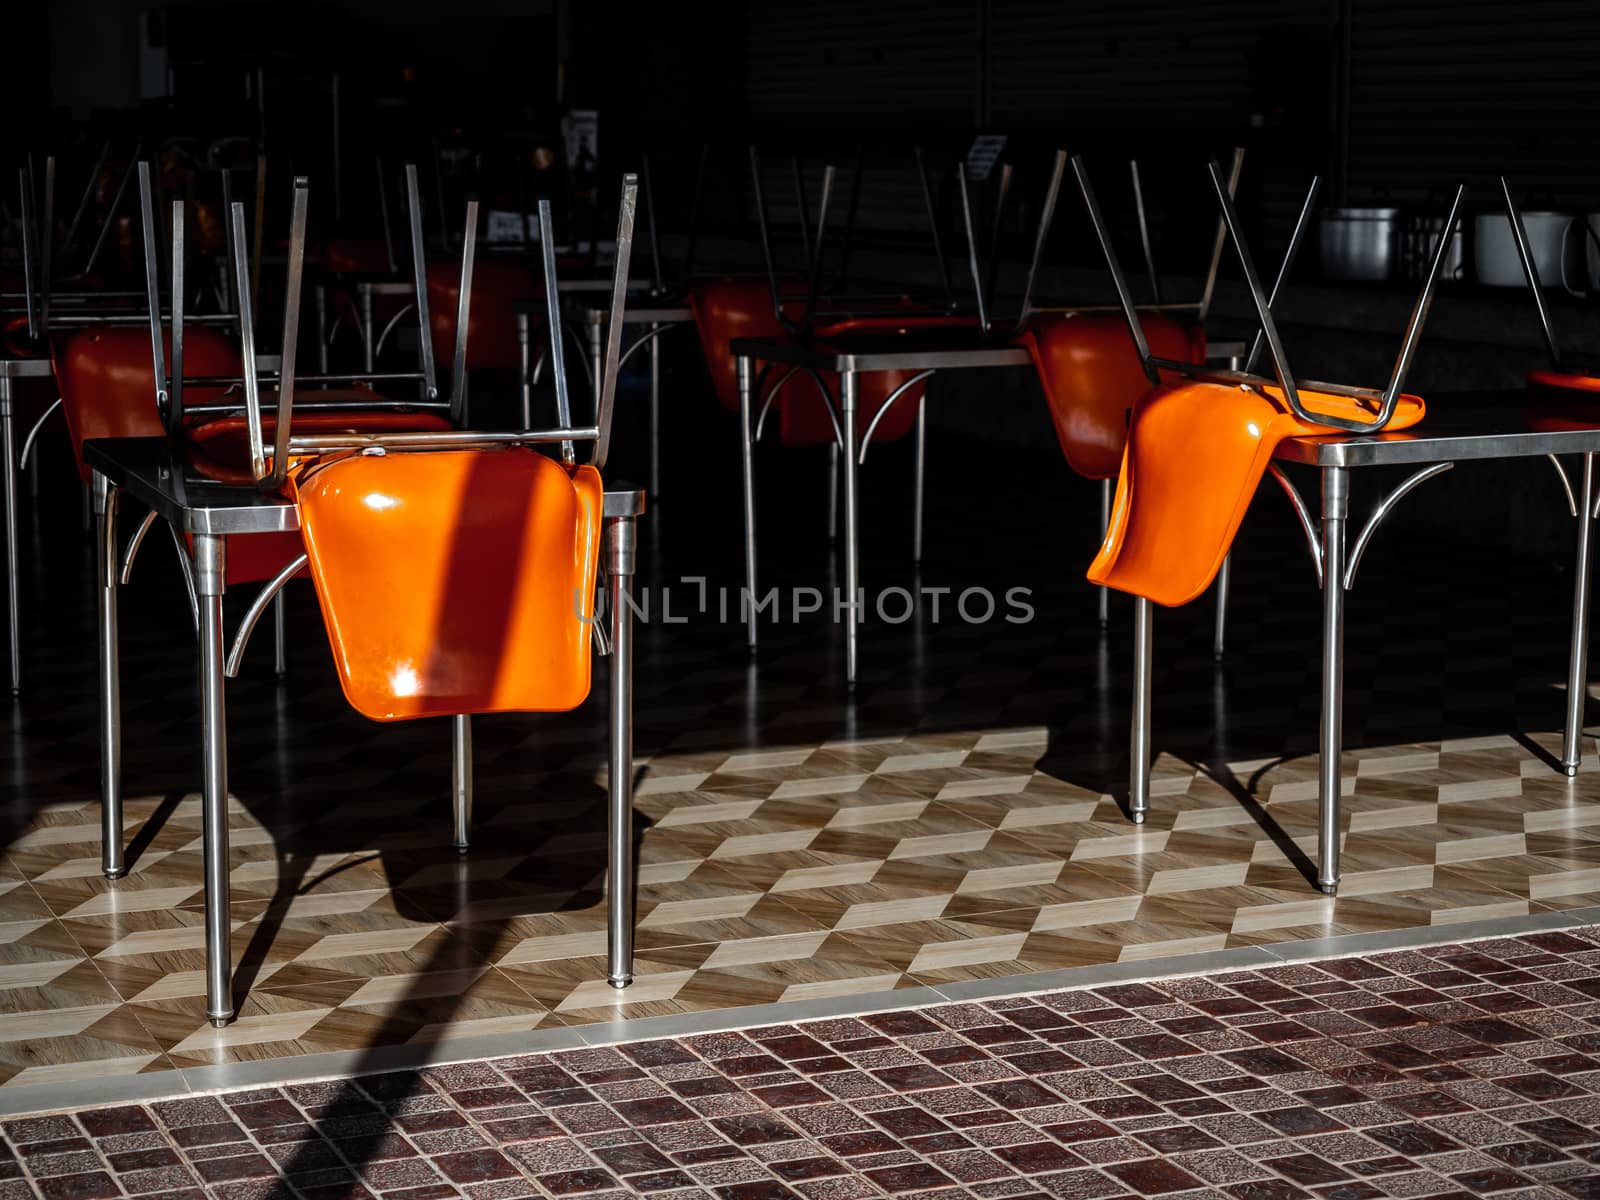 Upside down chairs, orange colour on tables in restaurant due to city lockdown during Coronavirus or Covid-19 pandemic to stop infection spreading crisis.